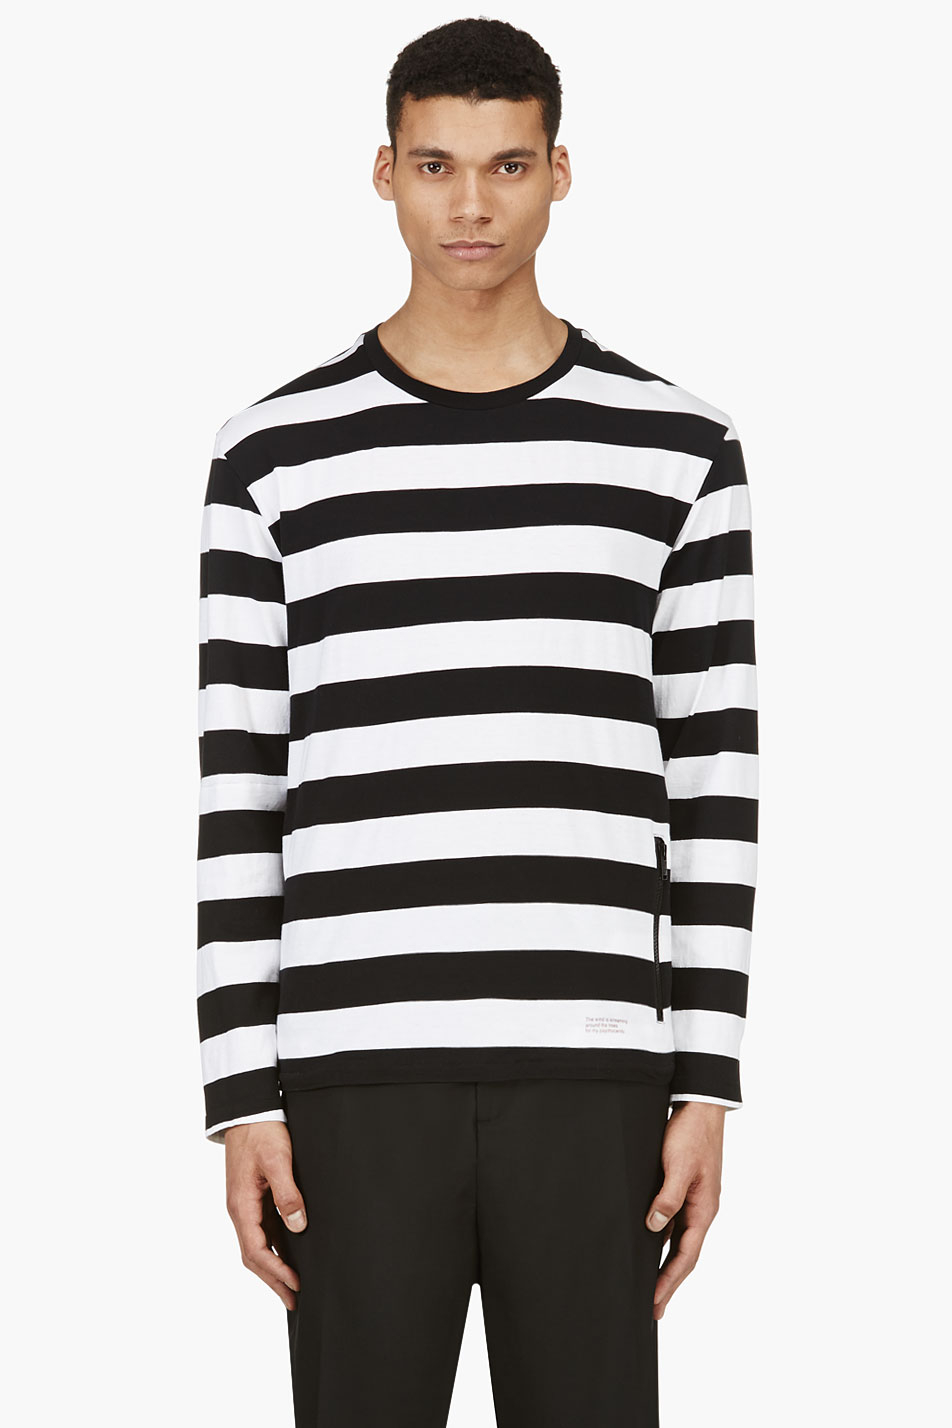 mens black and white striped tee